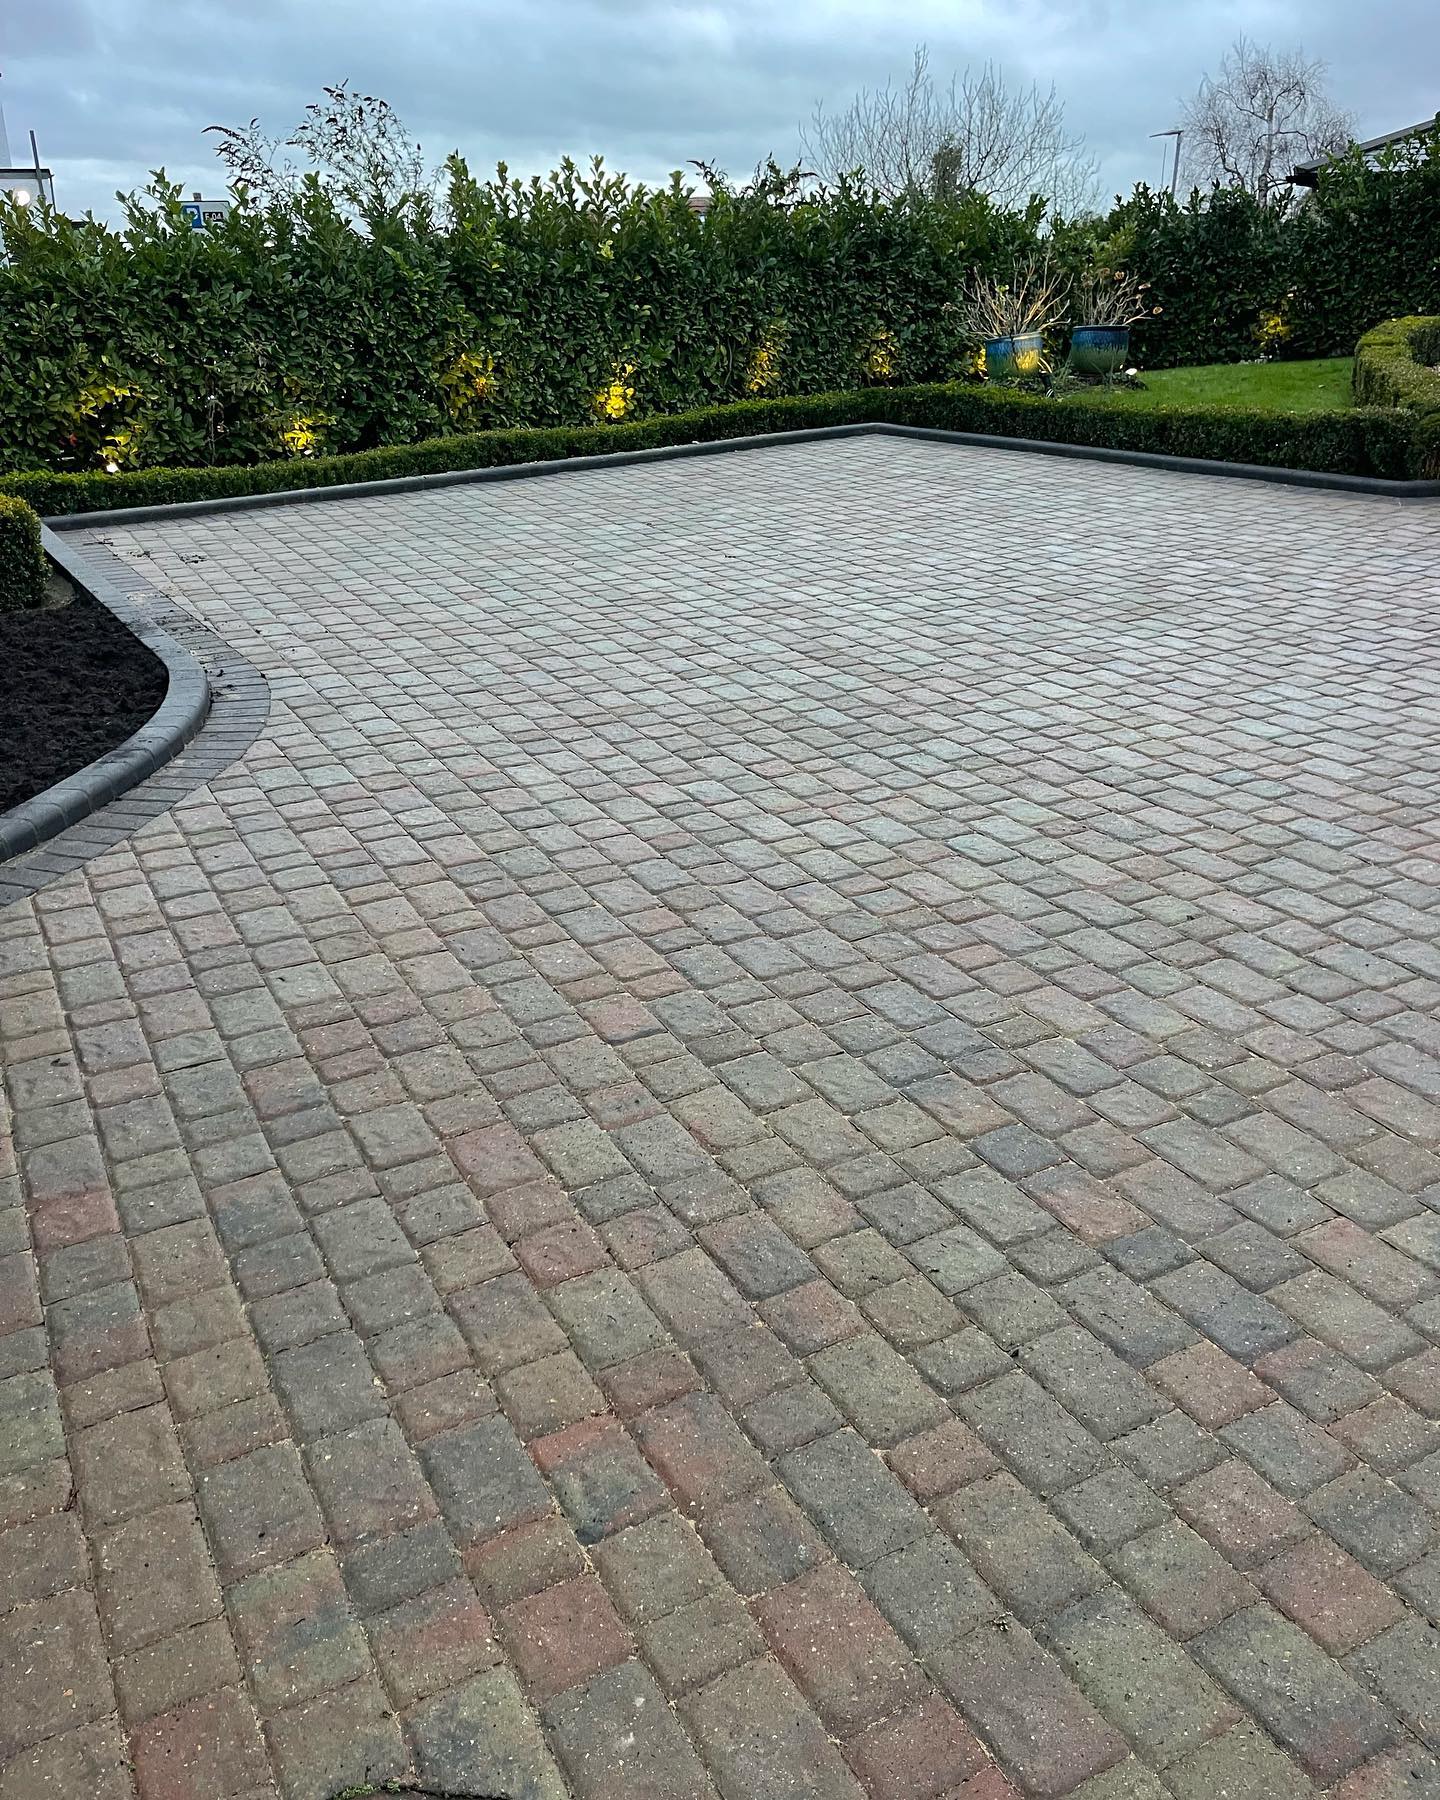 What Are the Types of Block Paving?